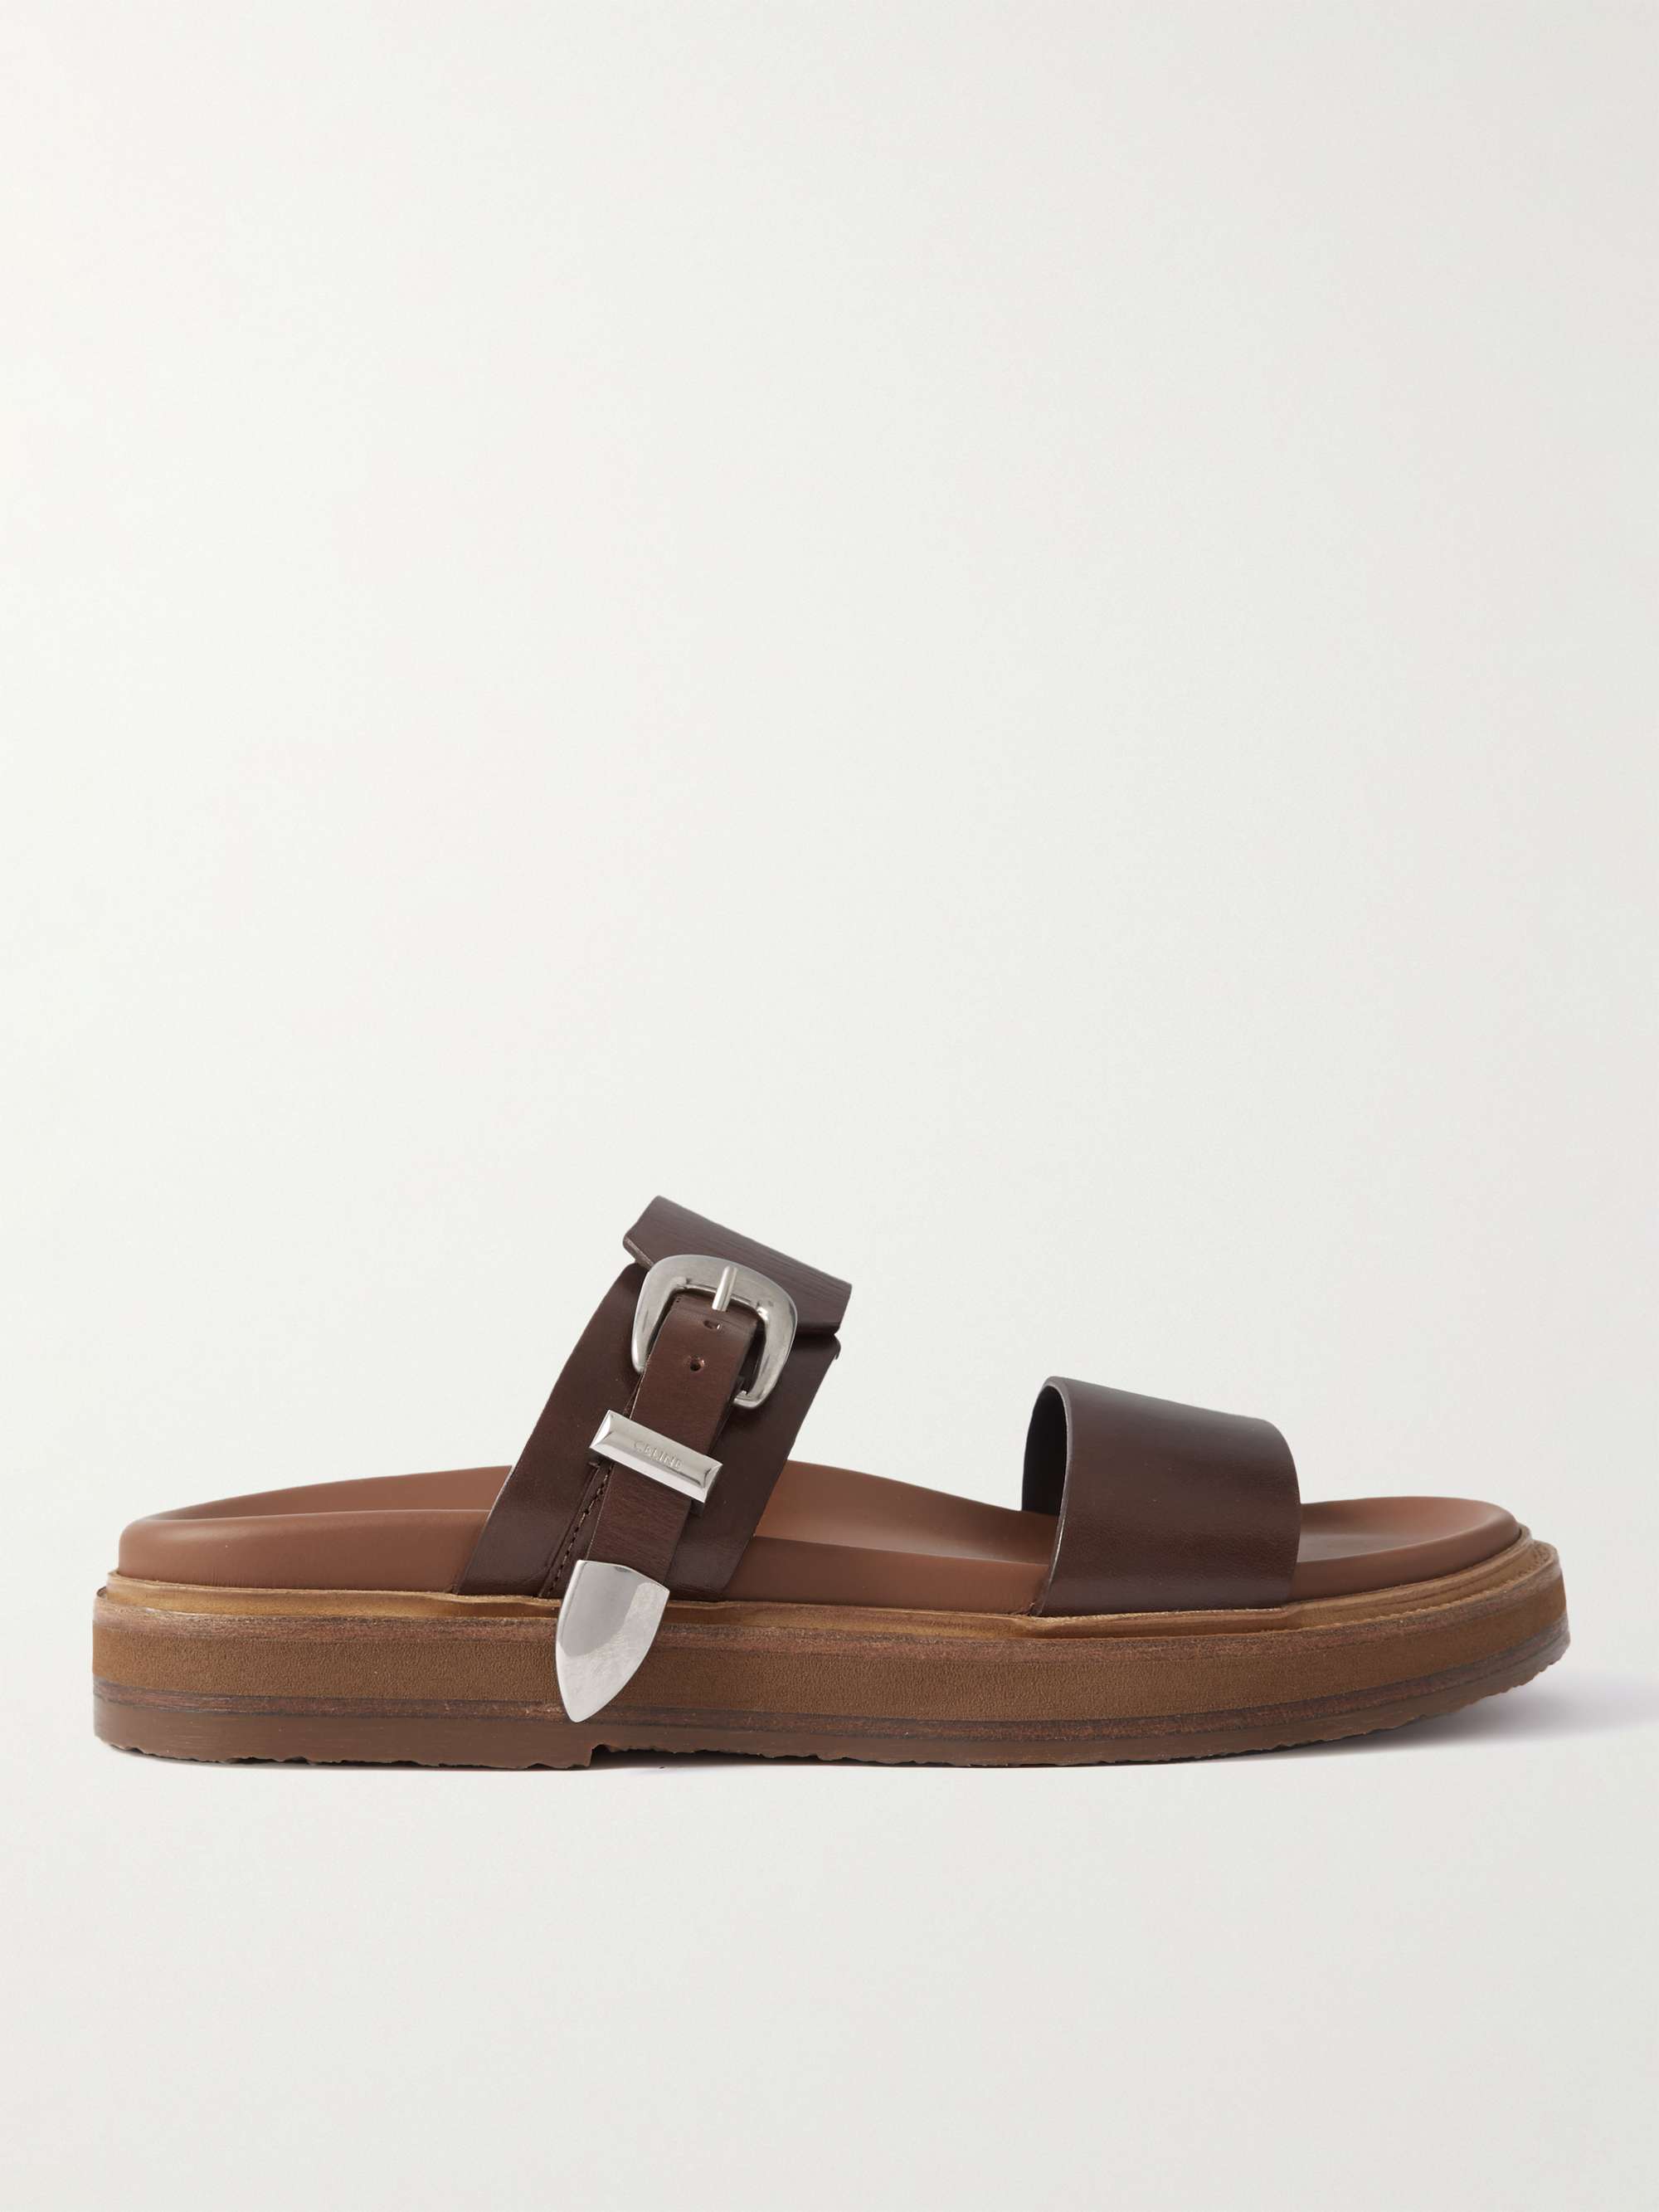 Sandals Collection for Men